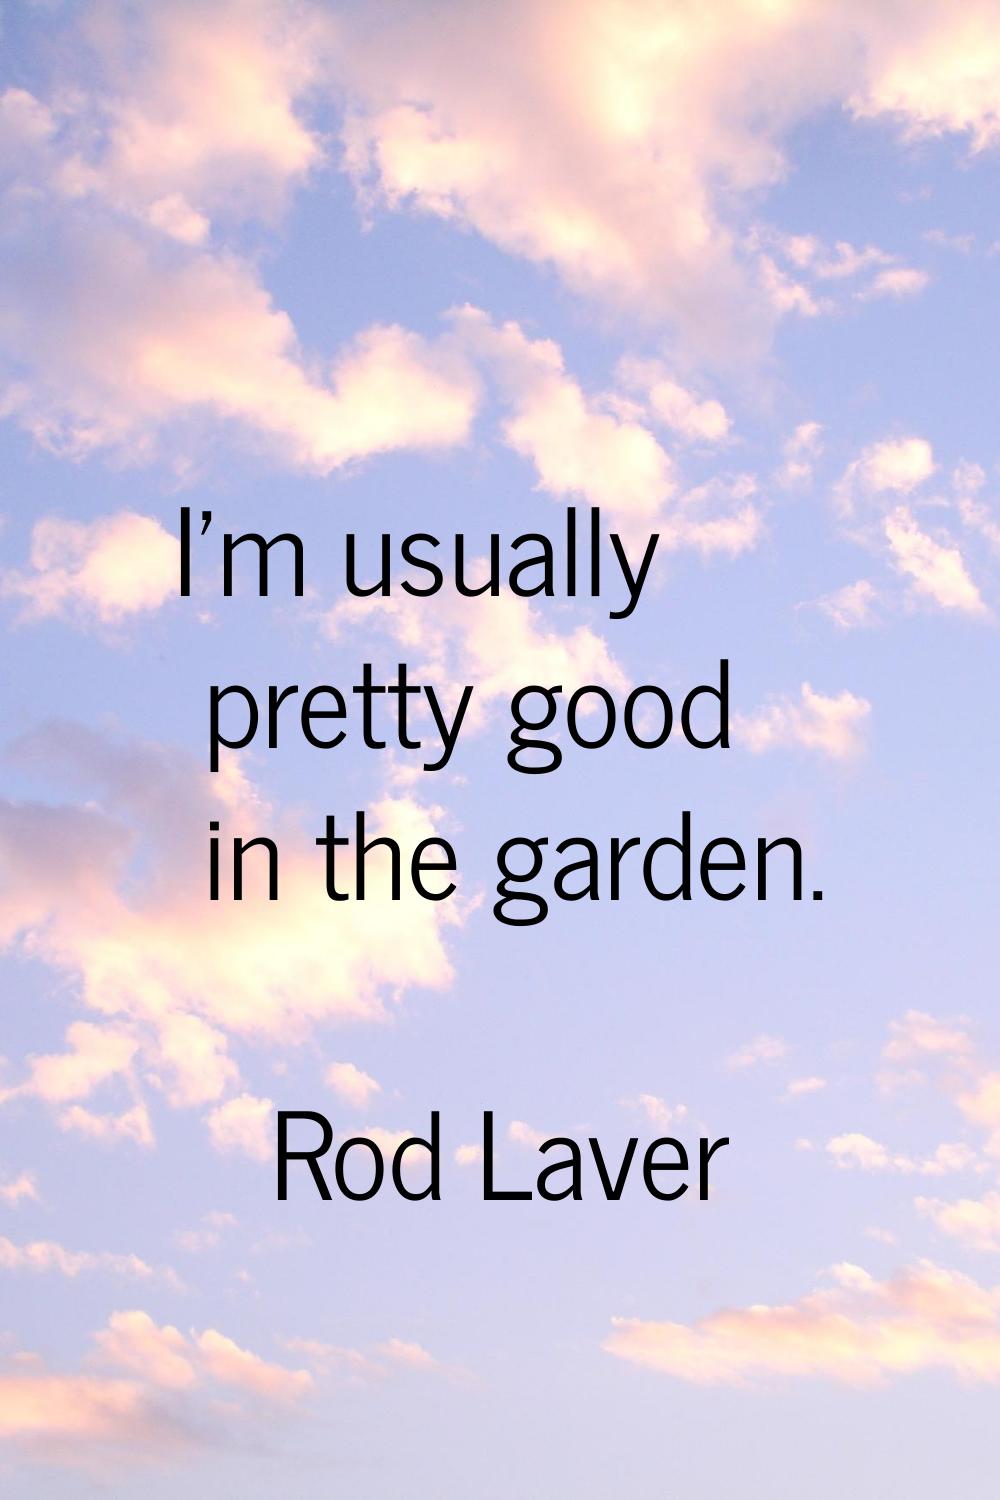 I'm usually pretty good in the garden.